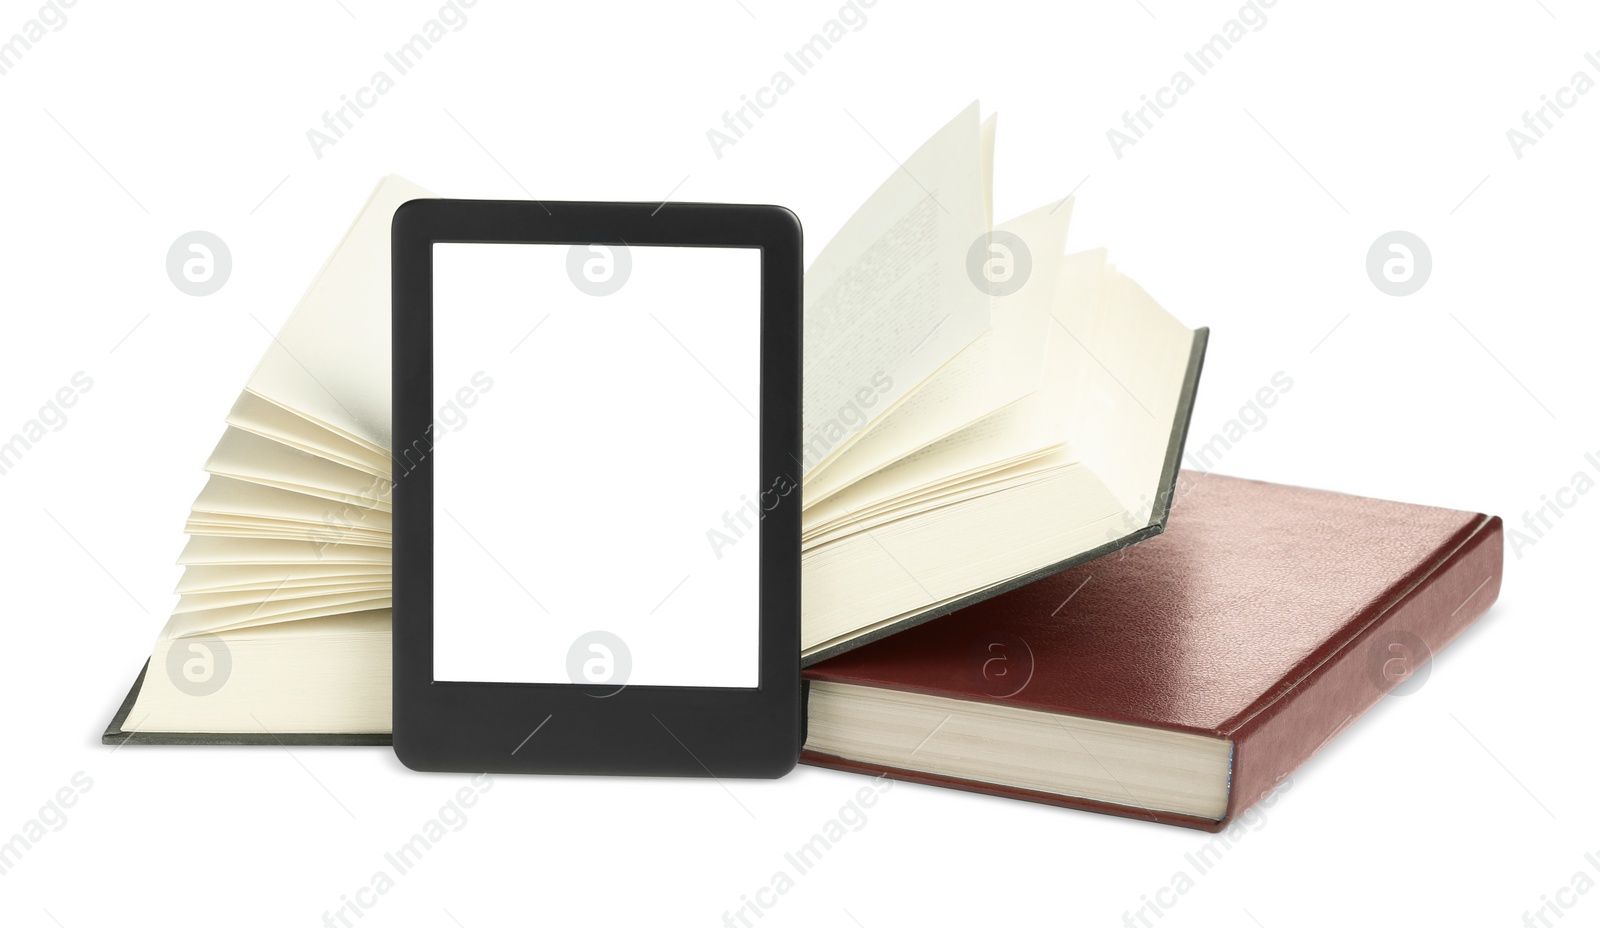 Photo of Hardcover books and modern e-book isolated on white